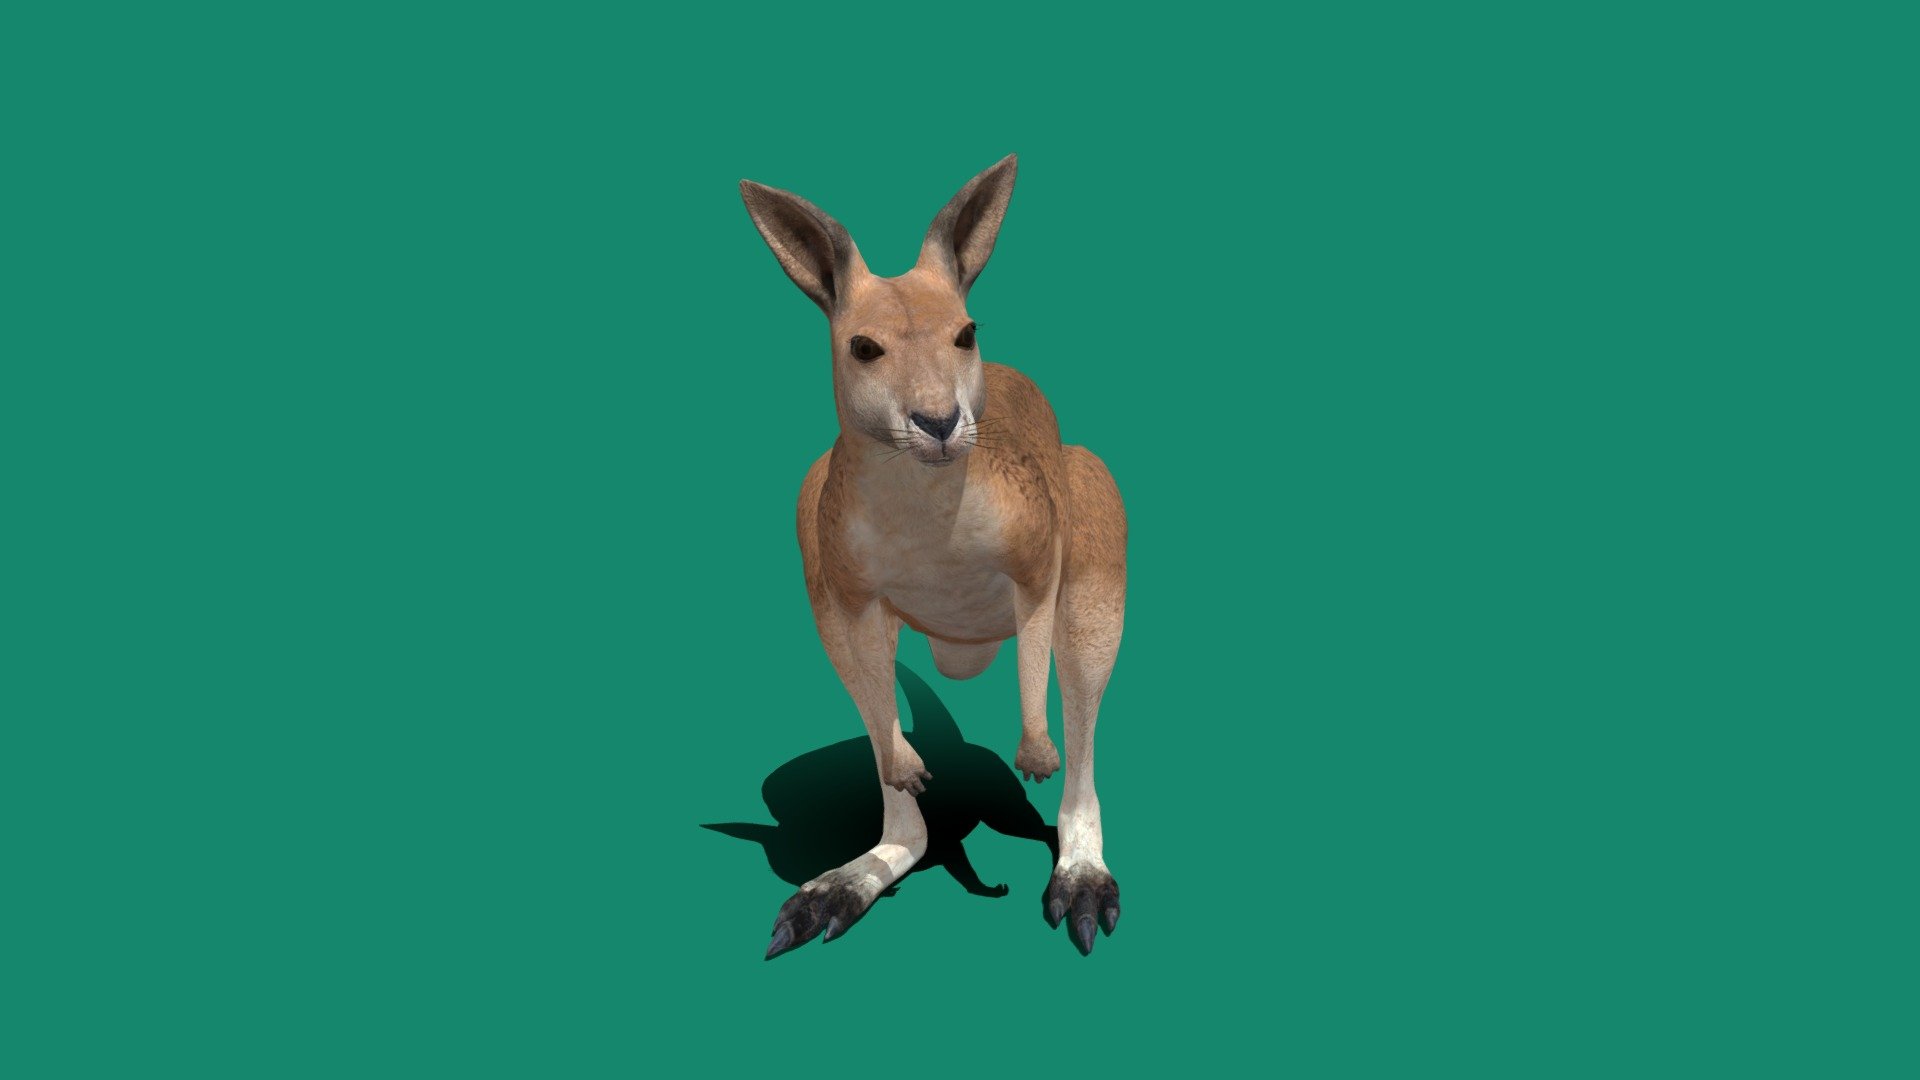 Non-Commercial Kangaroo 
The kangaroo is a marsupial from the family Macropodidae. In common use the term is used to describe the largest species from this family, the red kangaroo, as well as the antilopine kangaroo, eastern grey kangaroo, and western grey kangaroo. Kangaroos are indigenous to Australia and New Guinea 3d model